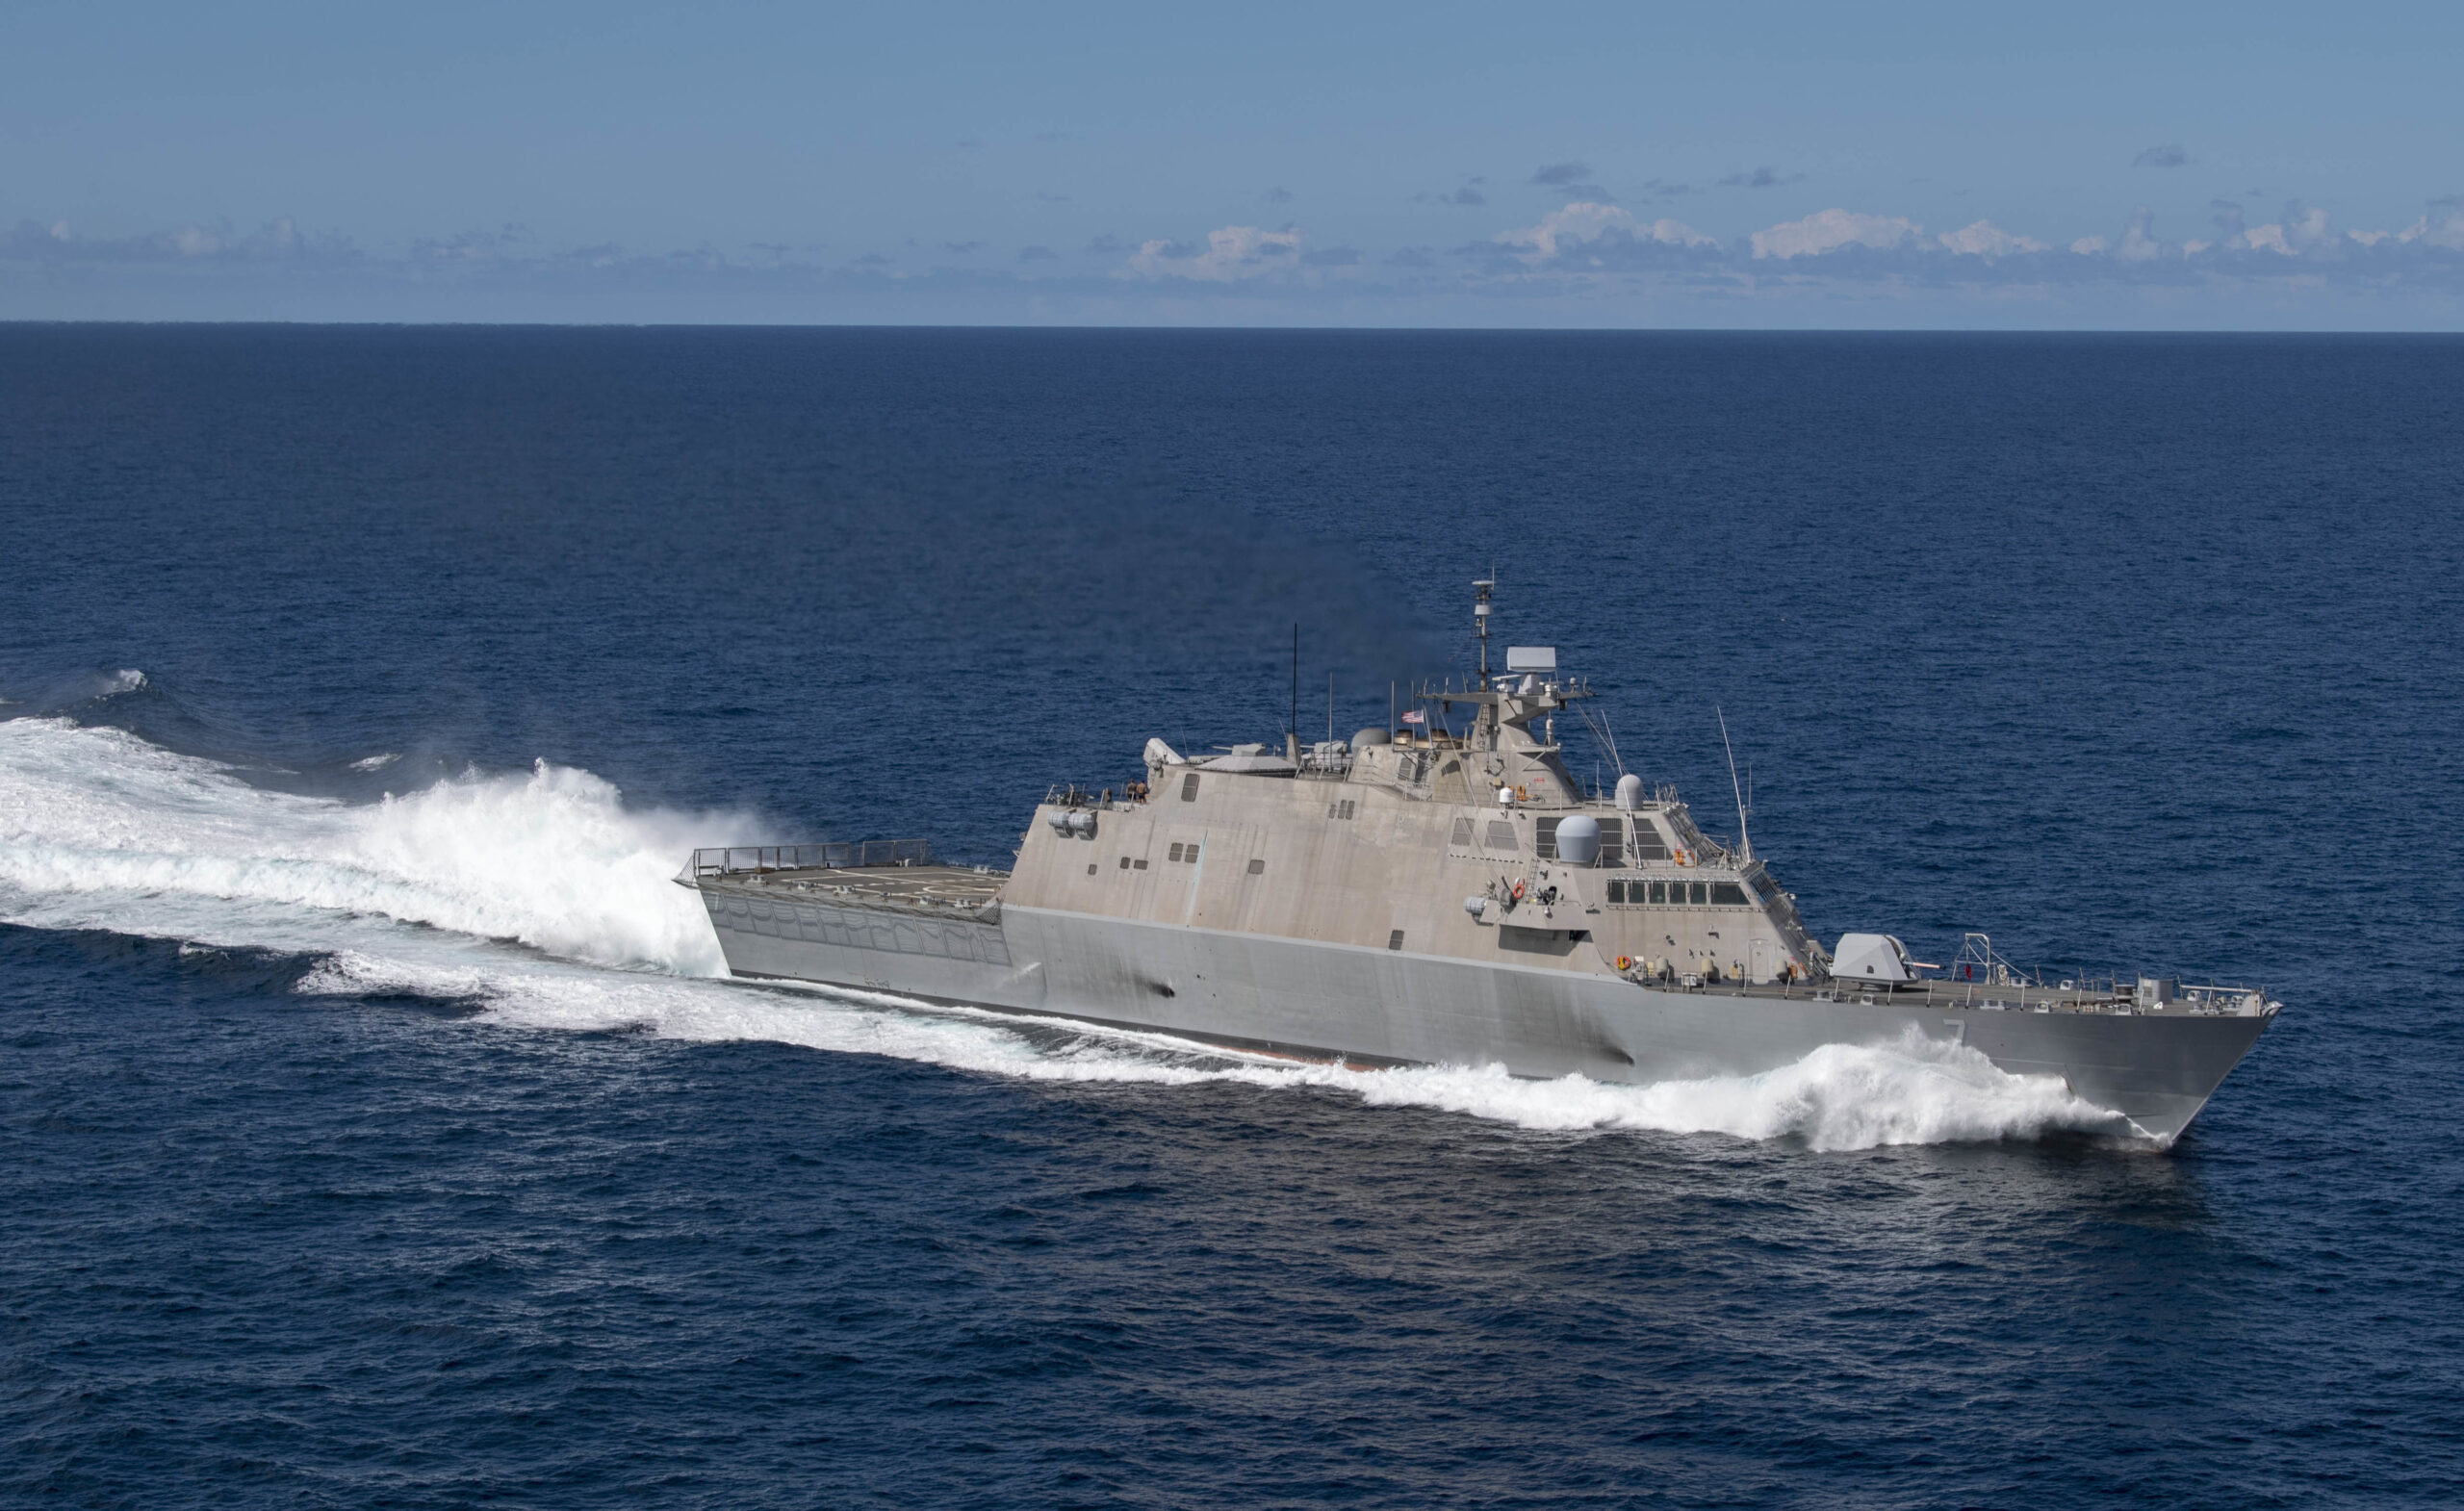 Navy finds fix for ‘unacceptable’ LCS issue; taxpayers likely to cover half of costs